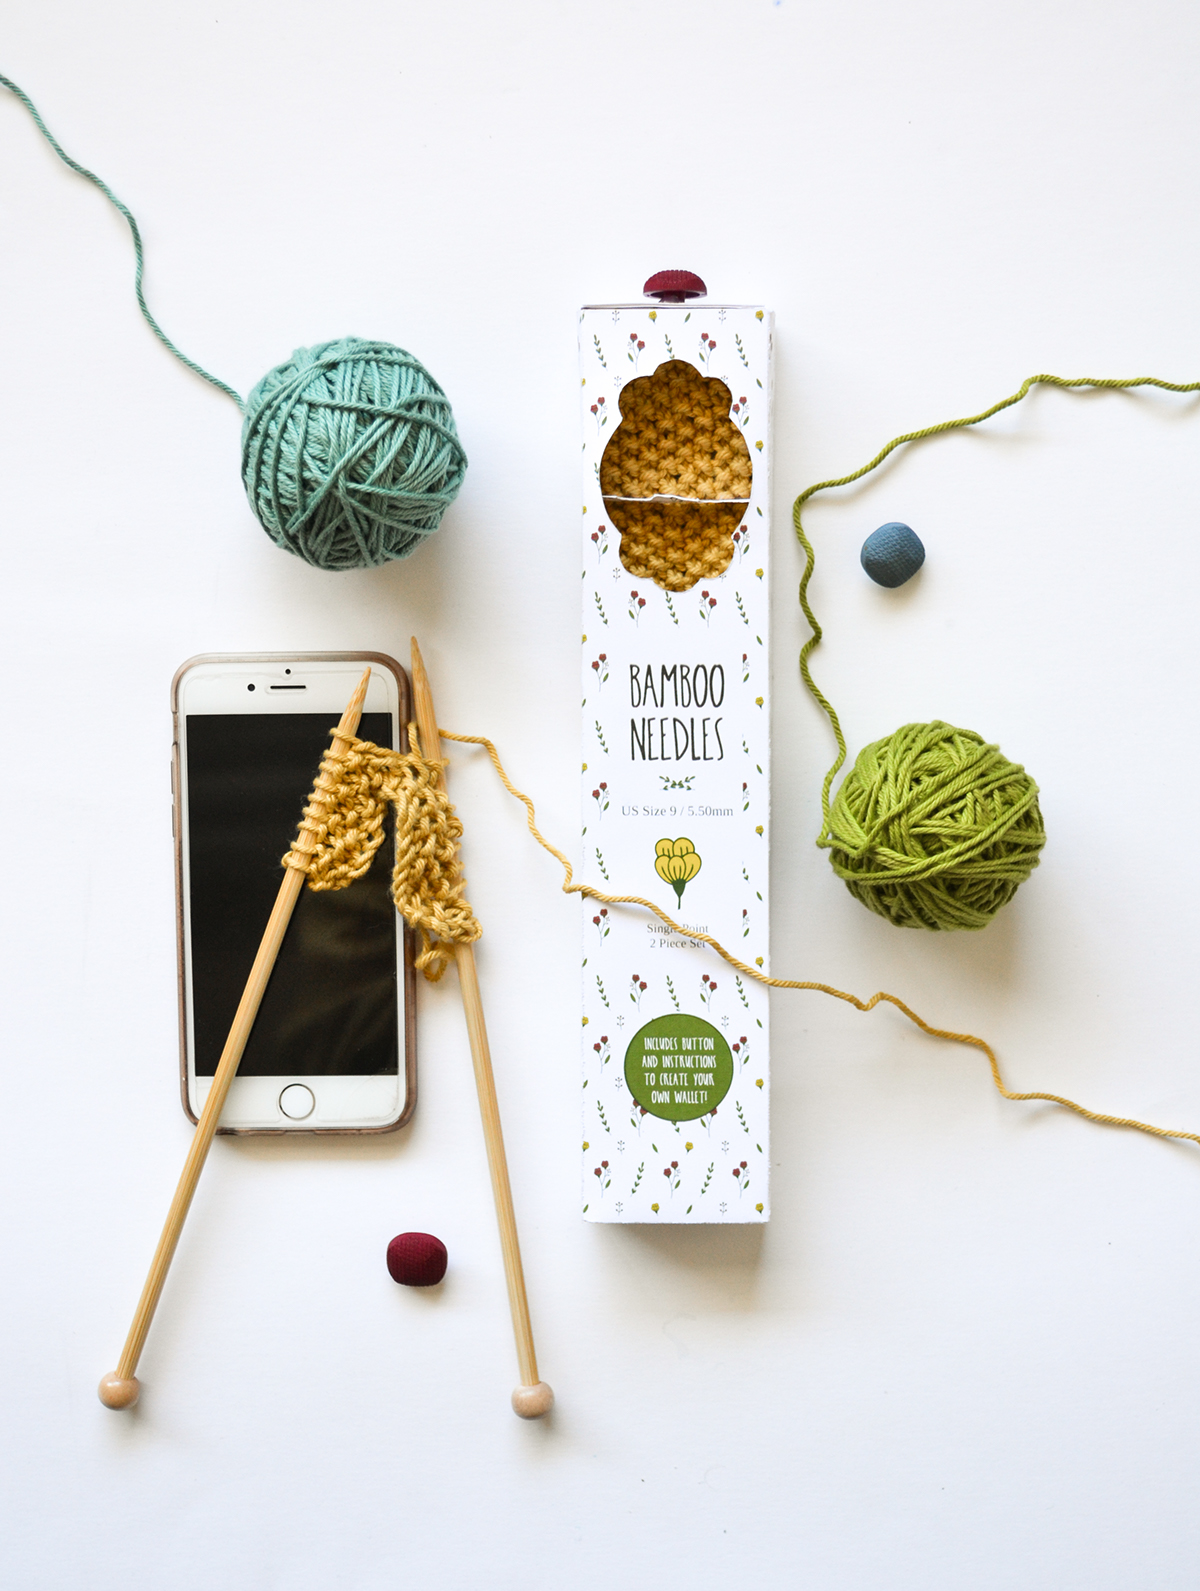 knitting needles bamboo pattern floral cute novelty button craft seed stitch qr ux Interface tutorial